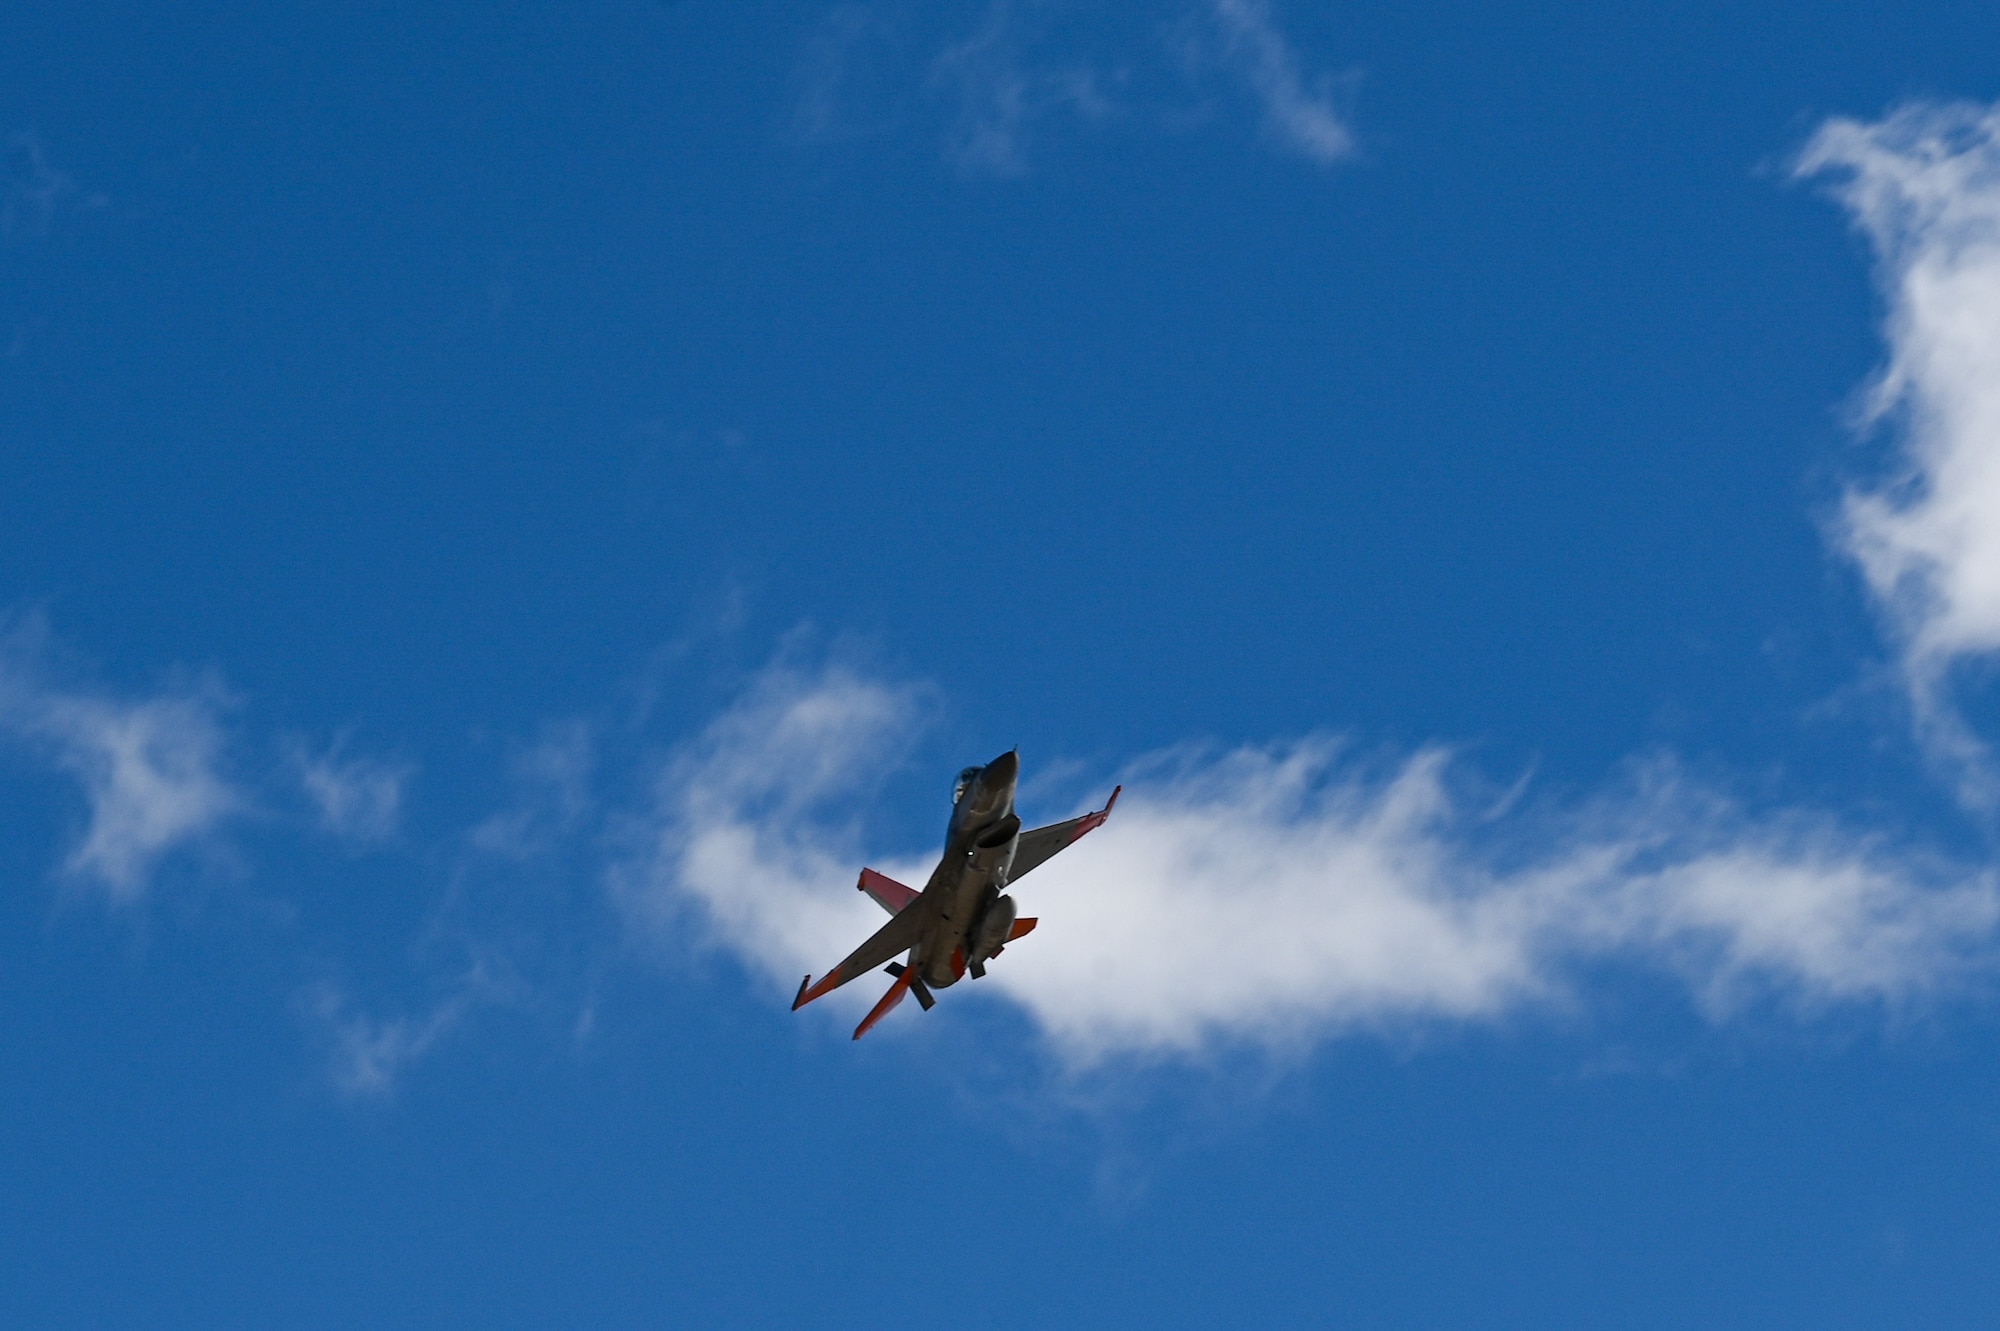 A QF-16 Viper does an aerial maneuver at Holloman Air Force Base, New Mexico, Feb. 22, 2023. The 82nd ATRS detachment at Holloman is one of only two places in the world that operate QF-16 Vipers. (U.S. Air Force photo by Airman 1st Class Isaiah Pedrazzini)